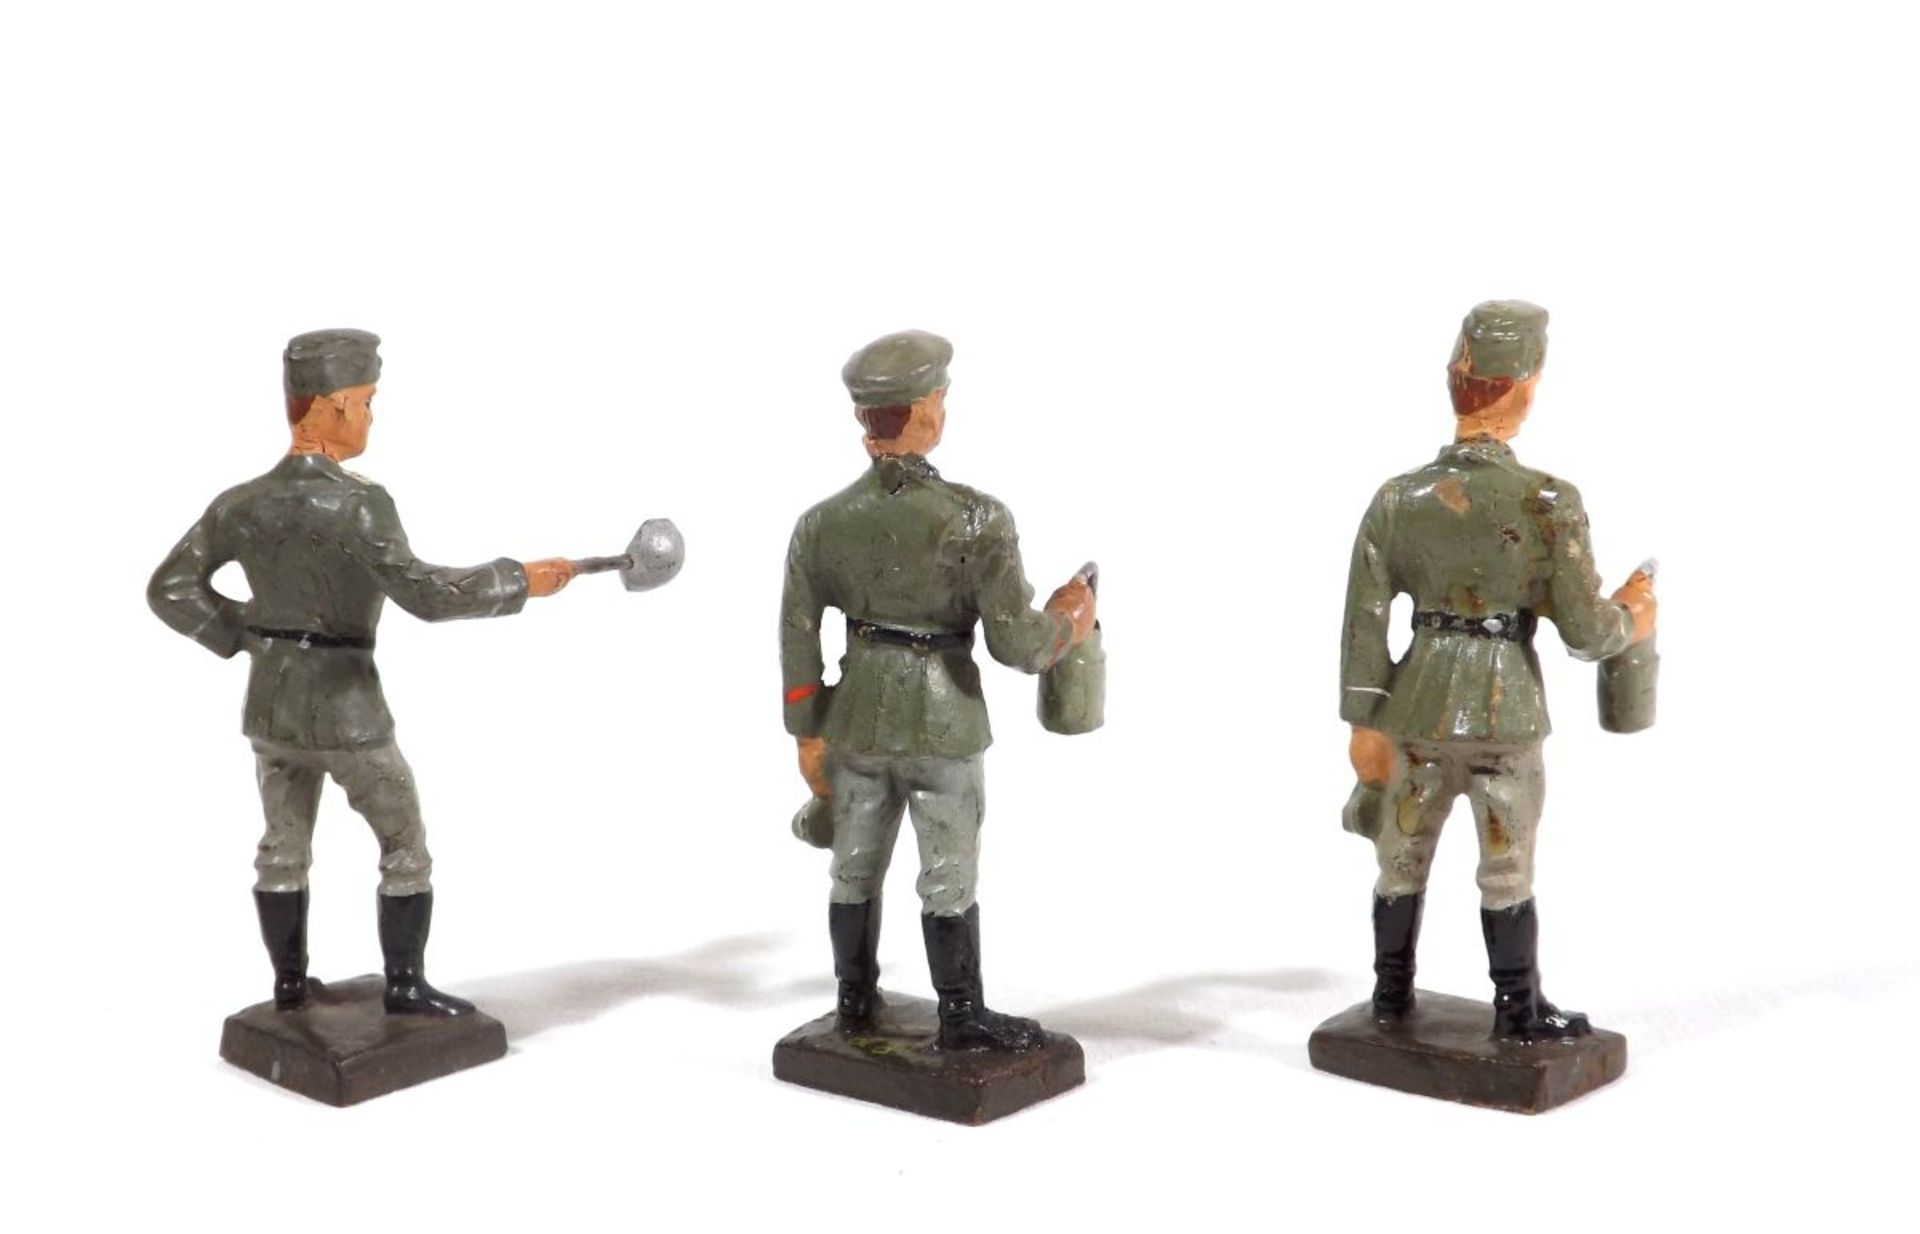 German military, Lineol, composition figures, 7-7,5 cm size, made in Germany about 1938 - Image 2 of 2